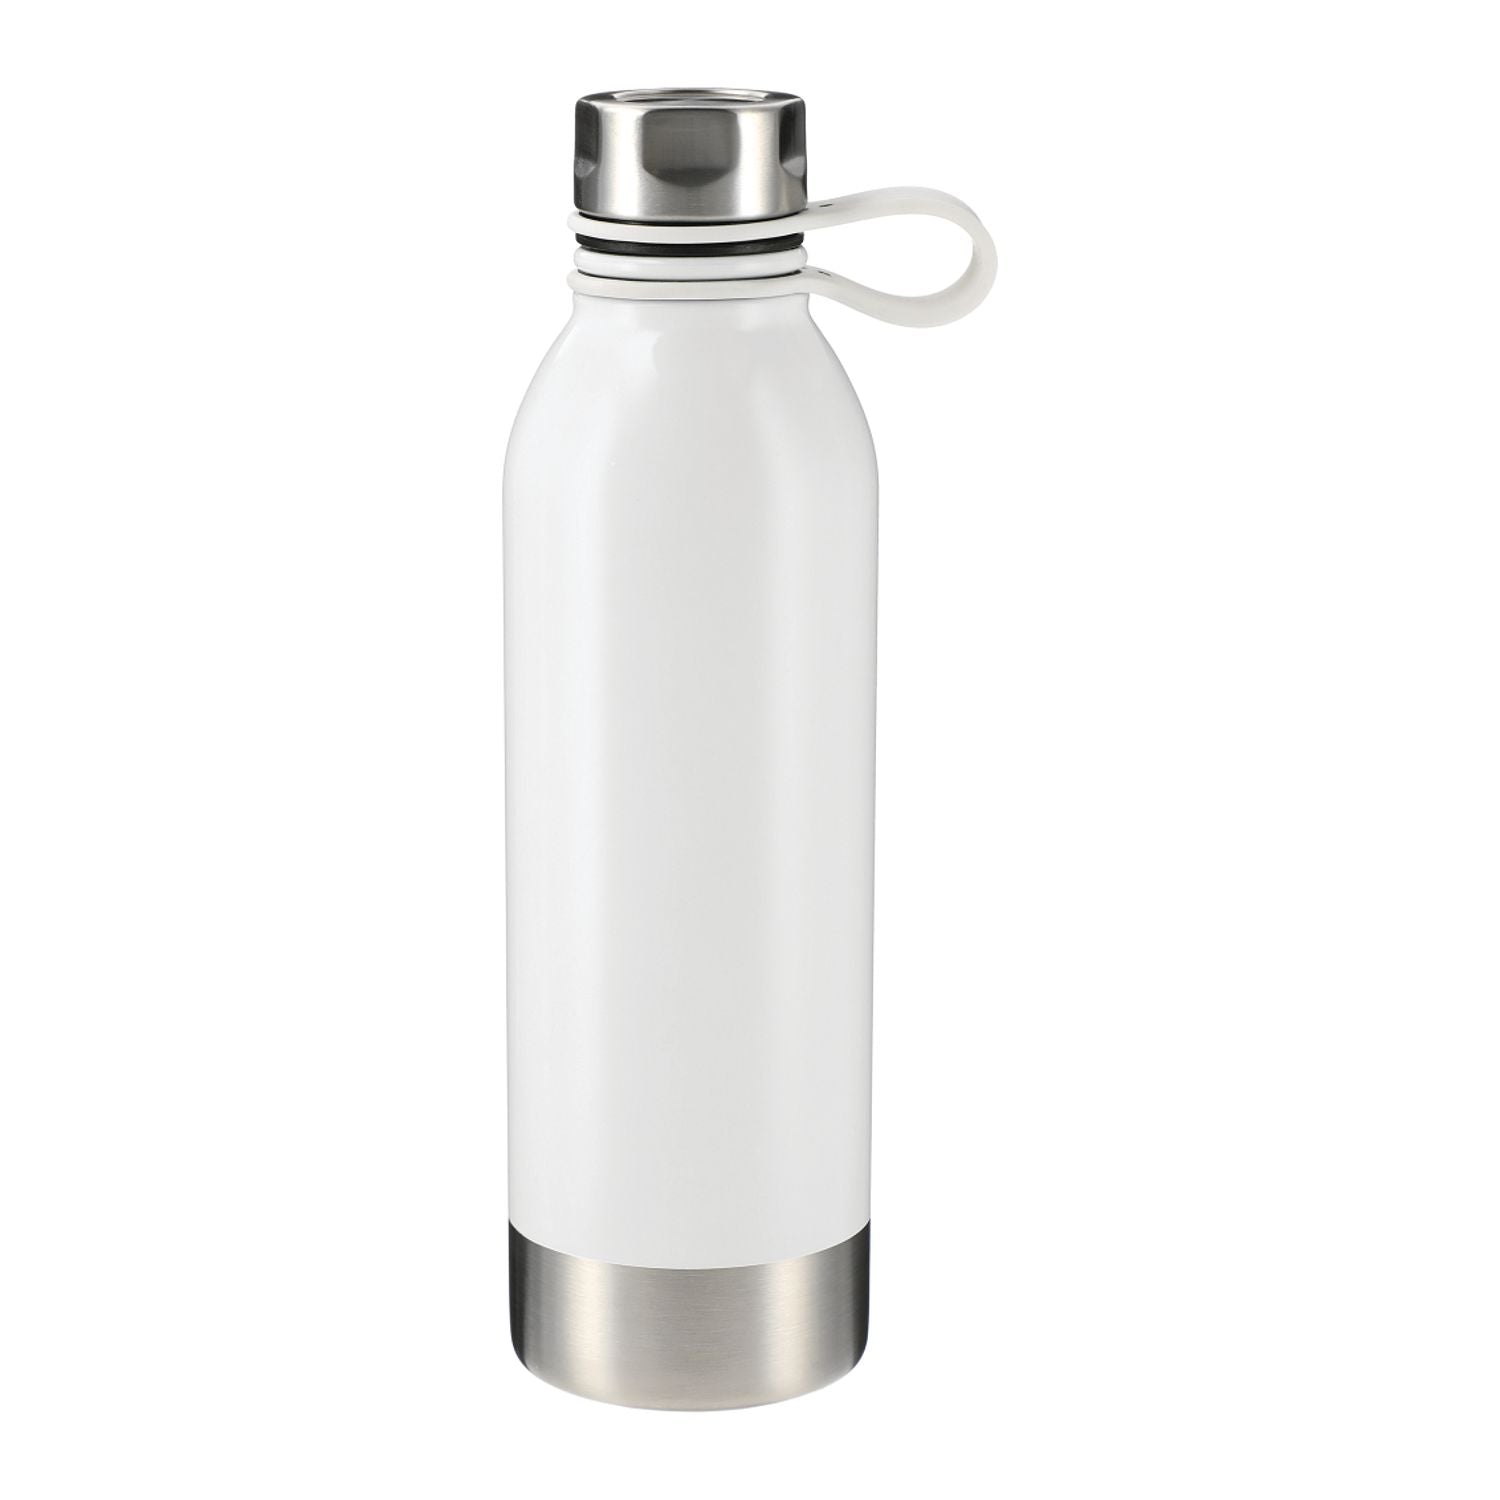 25oz Perth Single-Walled Stainless Steel Sports Water Bottle in white